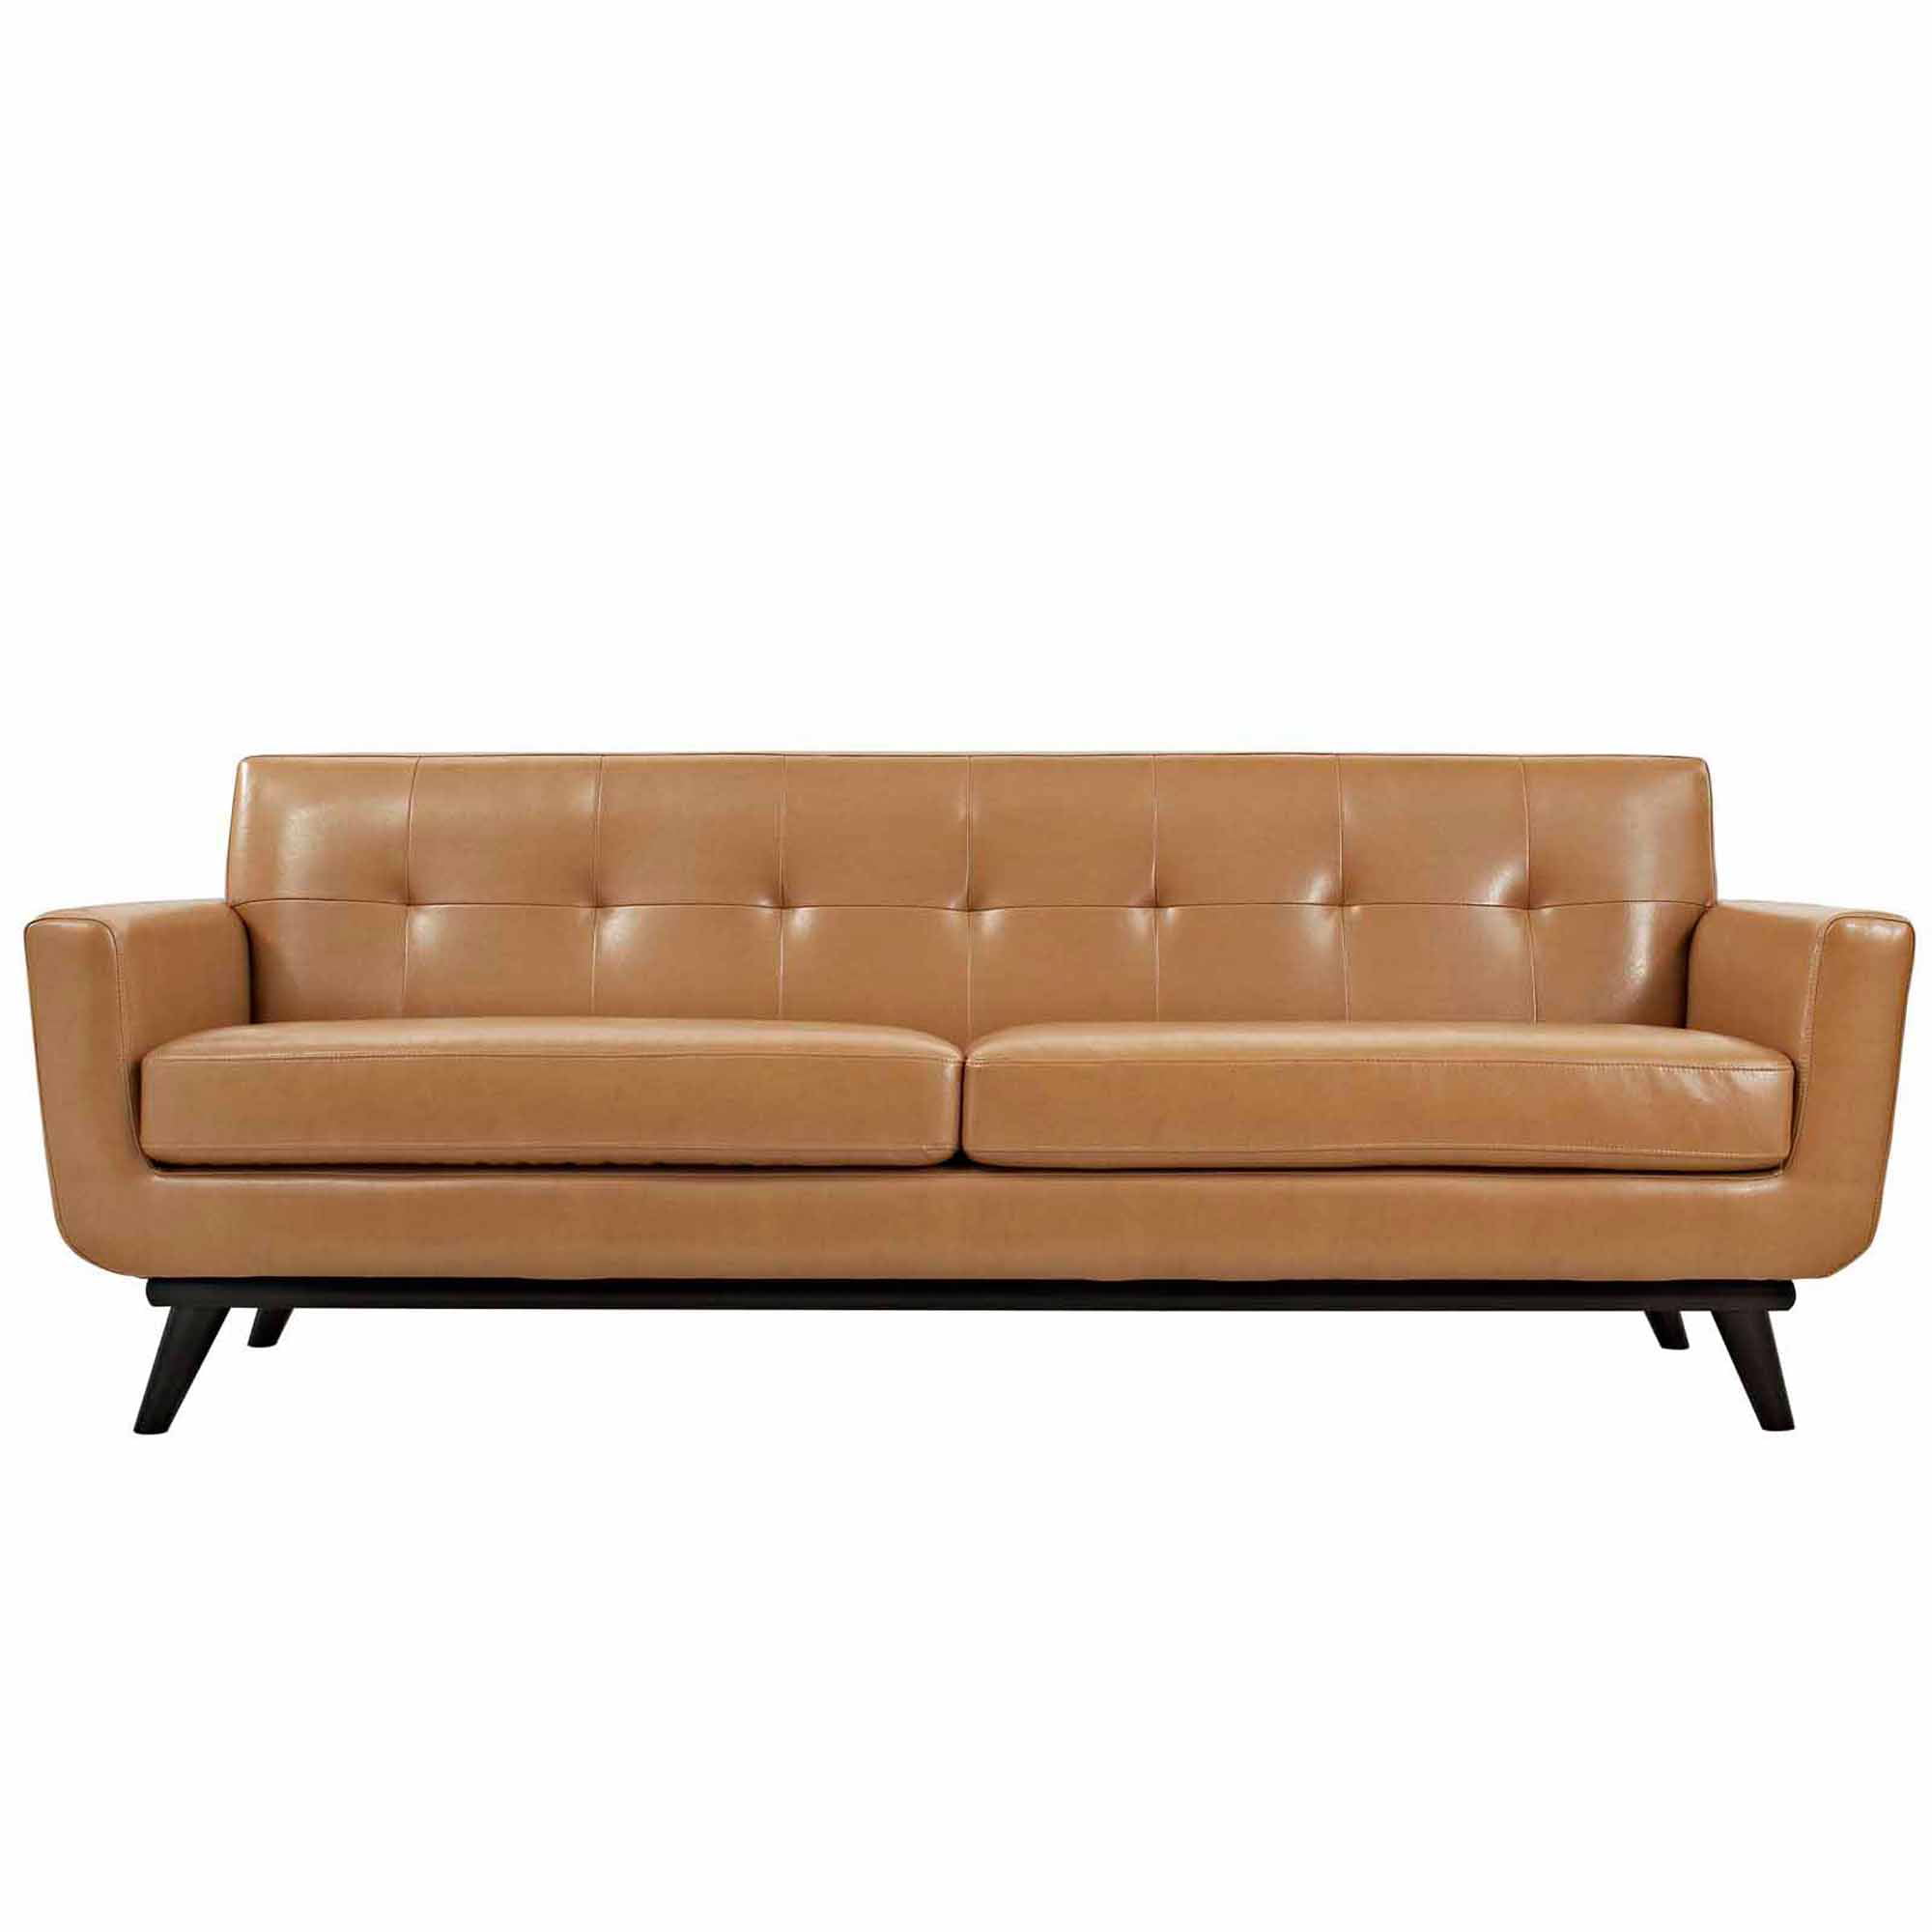 Modway Engage Bonded Leather Sofa with Wood Legs Multiple Colors